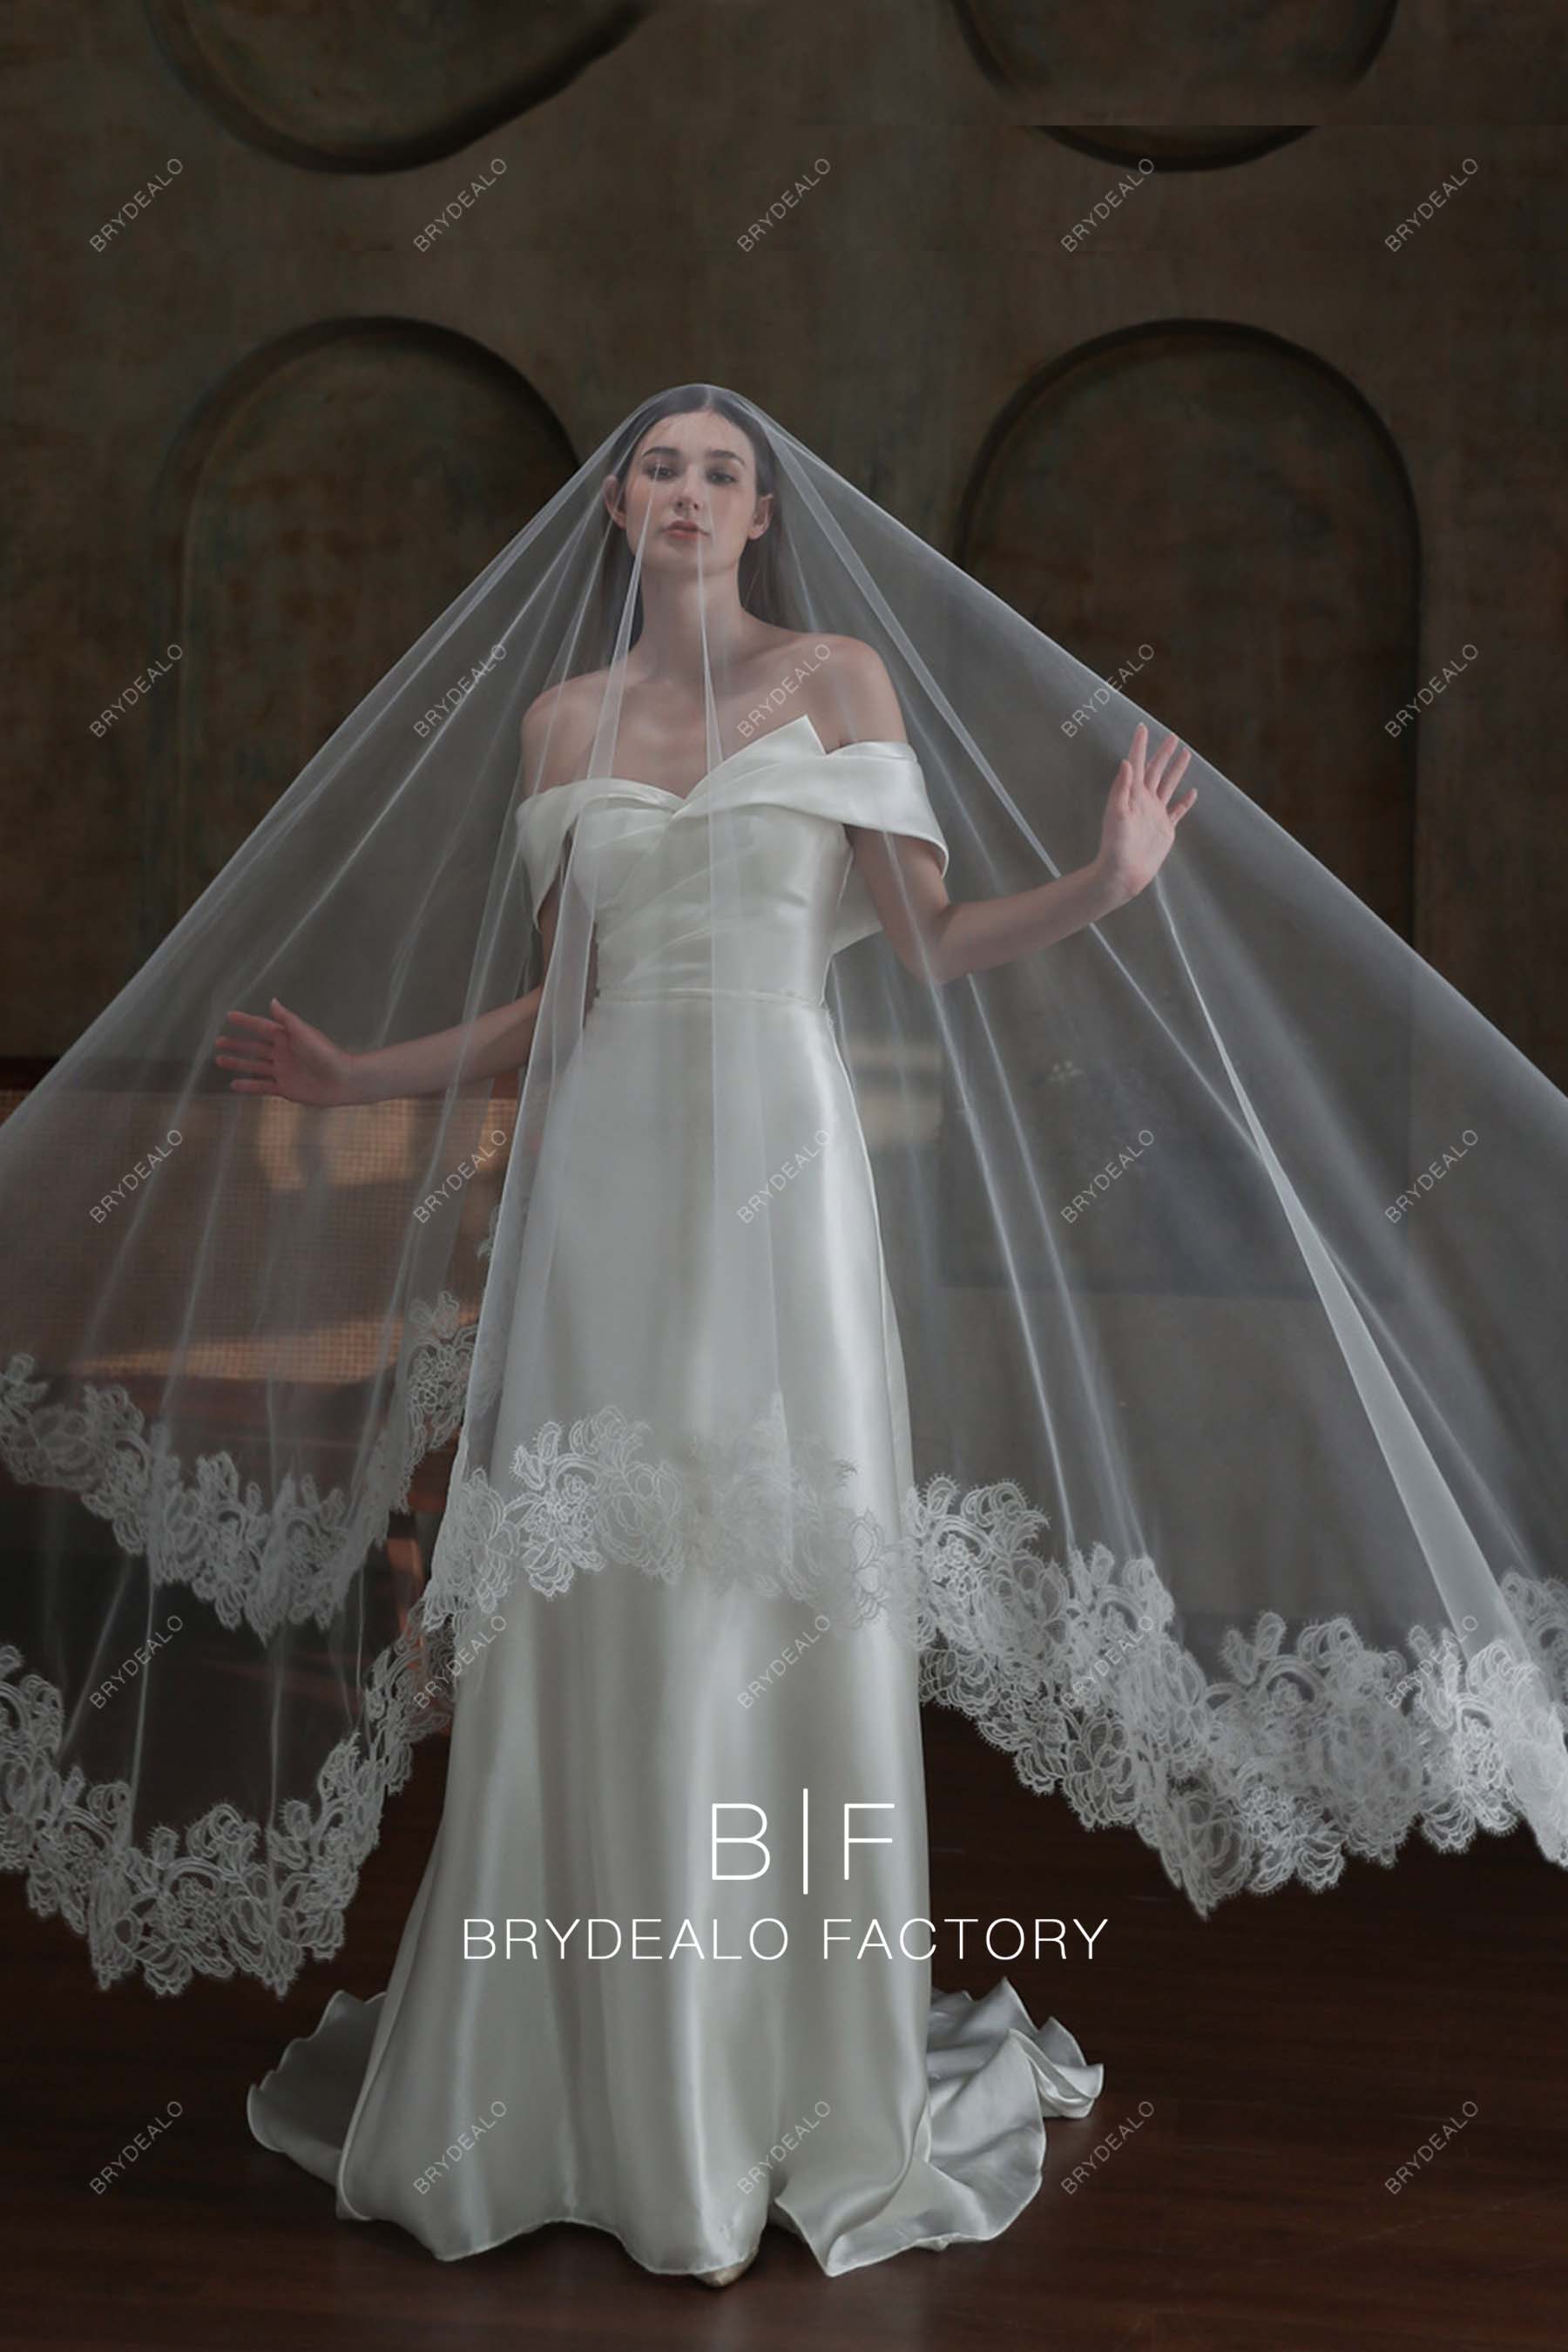 Lace Wedding Veil FN-056, 118 Inches Bridal Veil, Tulle Cathedral